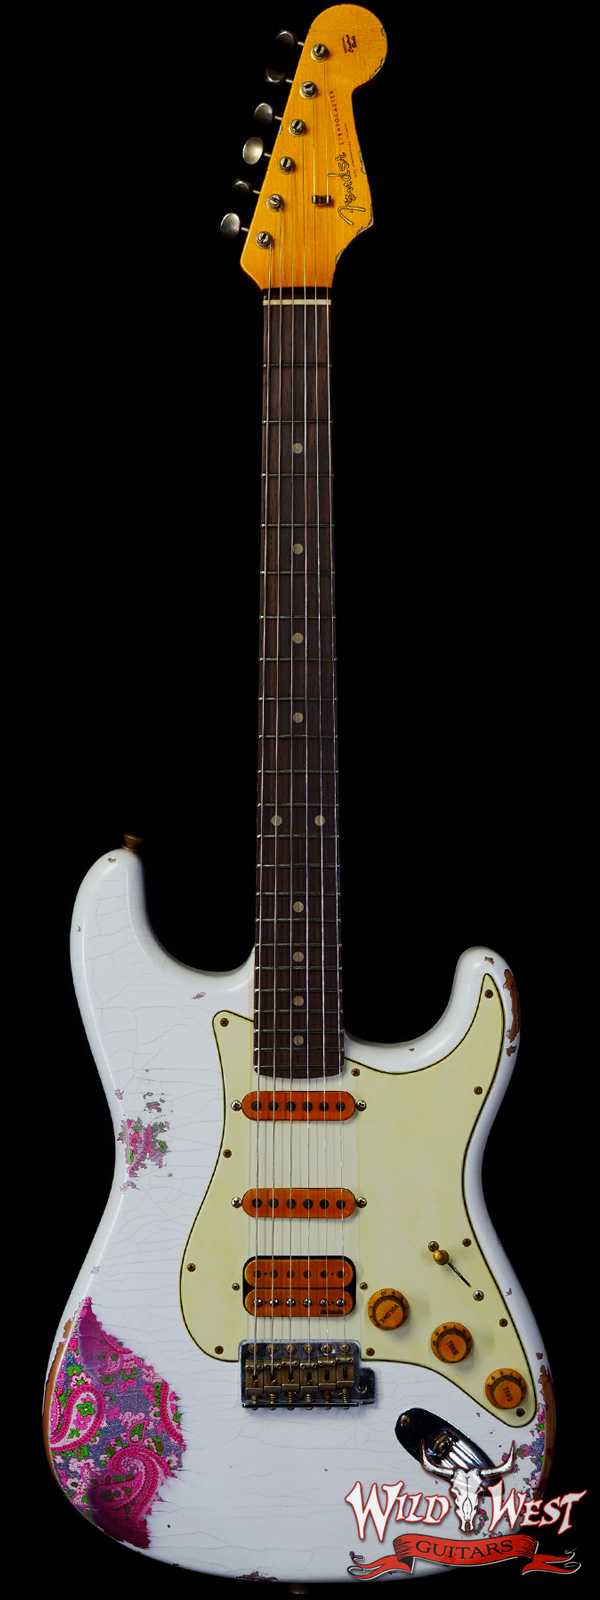 Fender Custom Shop Wild West White Lightning 2.0 Stratocaster HSS Rosewood Board 22 Frets Heavy Relic Pink Paisley